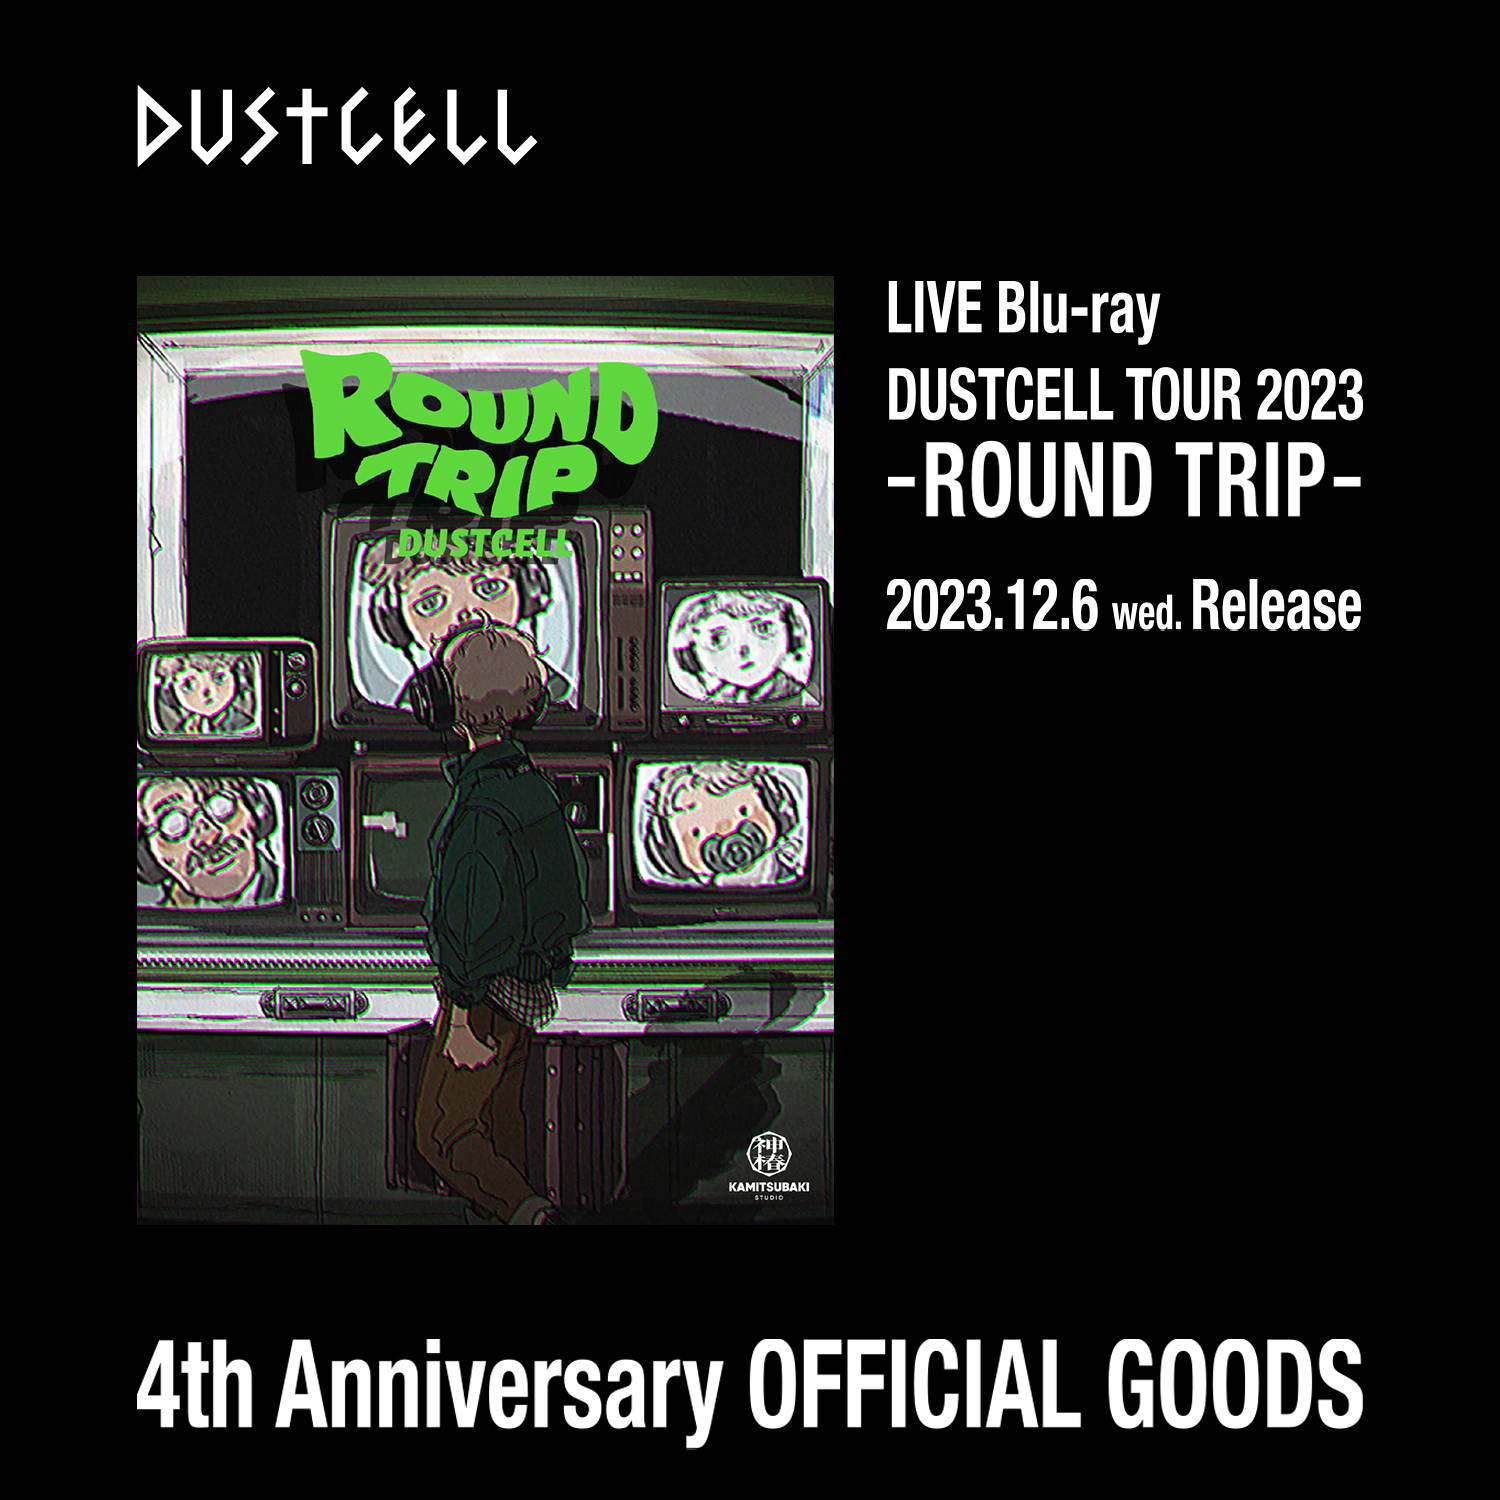 DUSTCELL Blu-ray「DUSTCELL TOUR 2023 -ROUND TRIP-」& 4th 